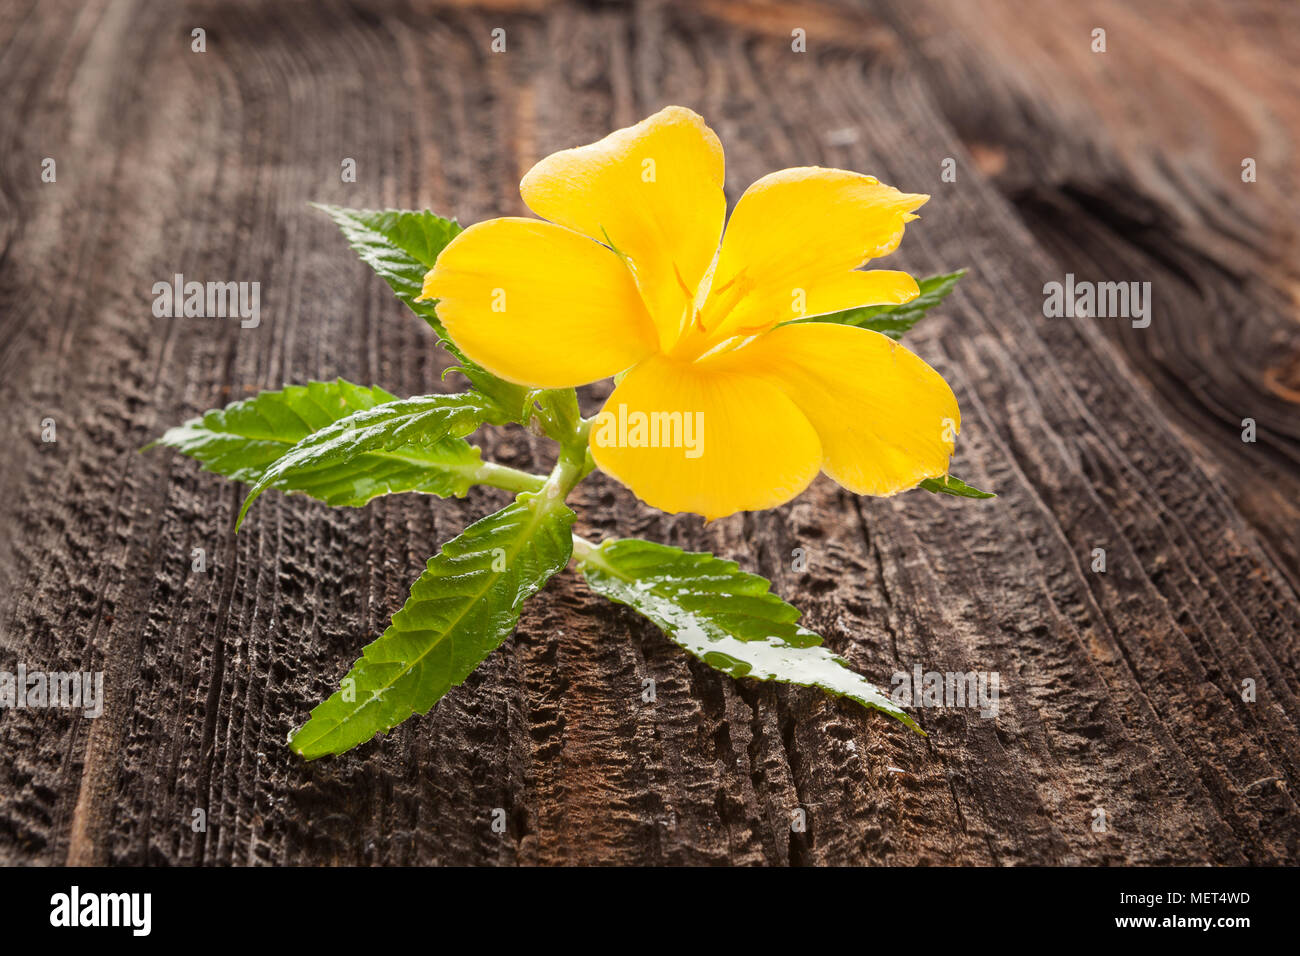 Damiana, turnera diffusa flower on brown wooden table. Medicinical herbs. Stock Photo